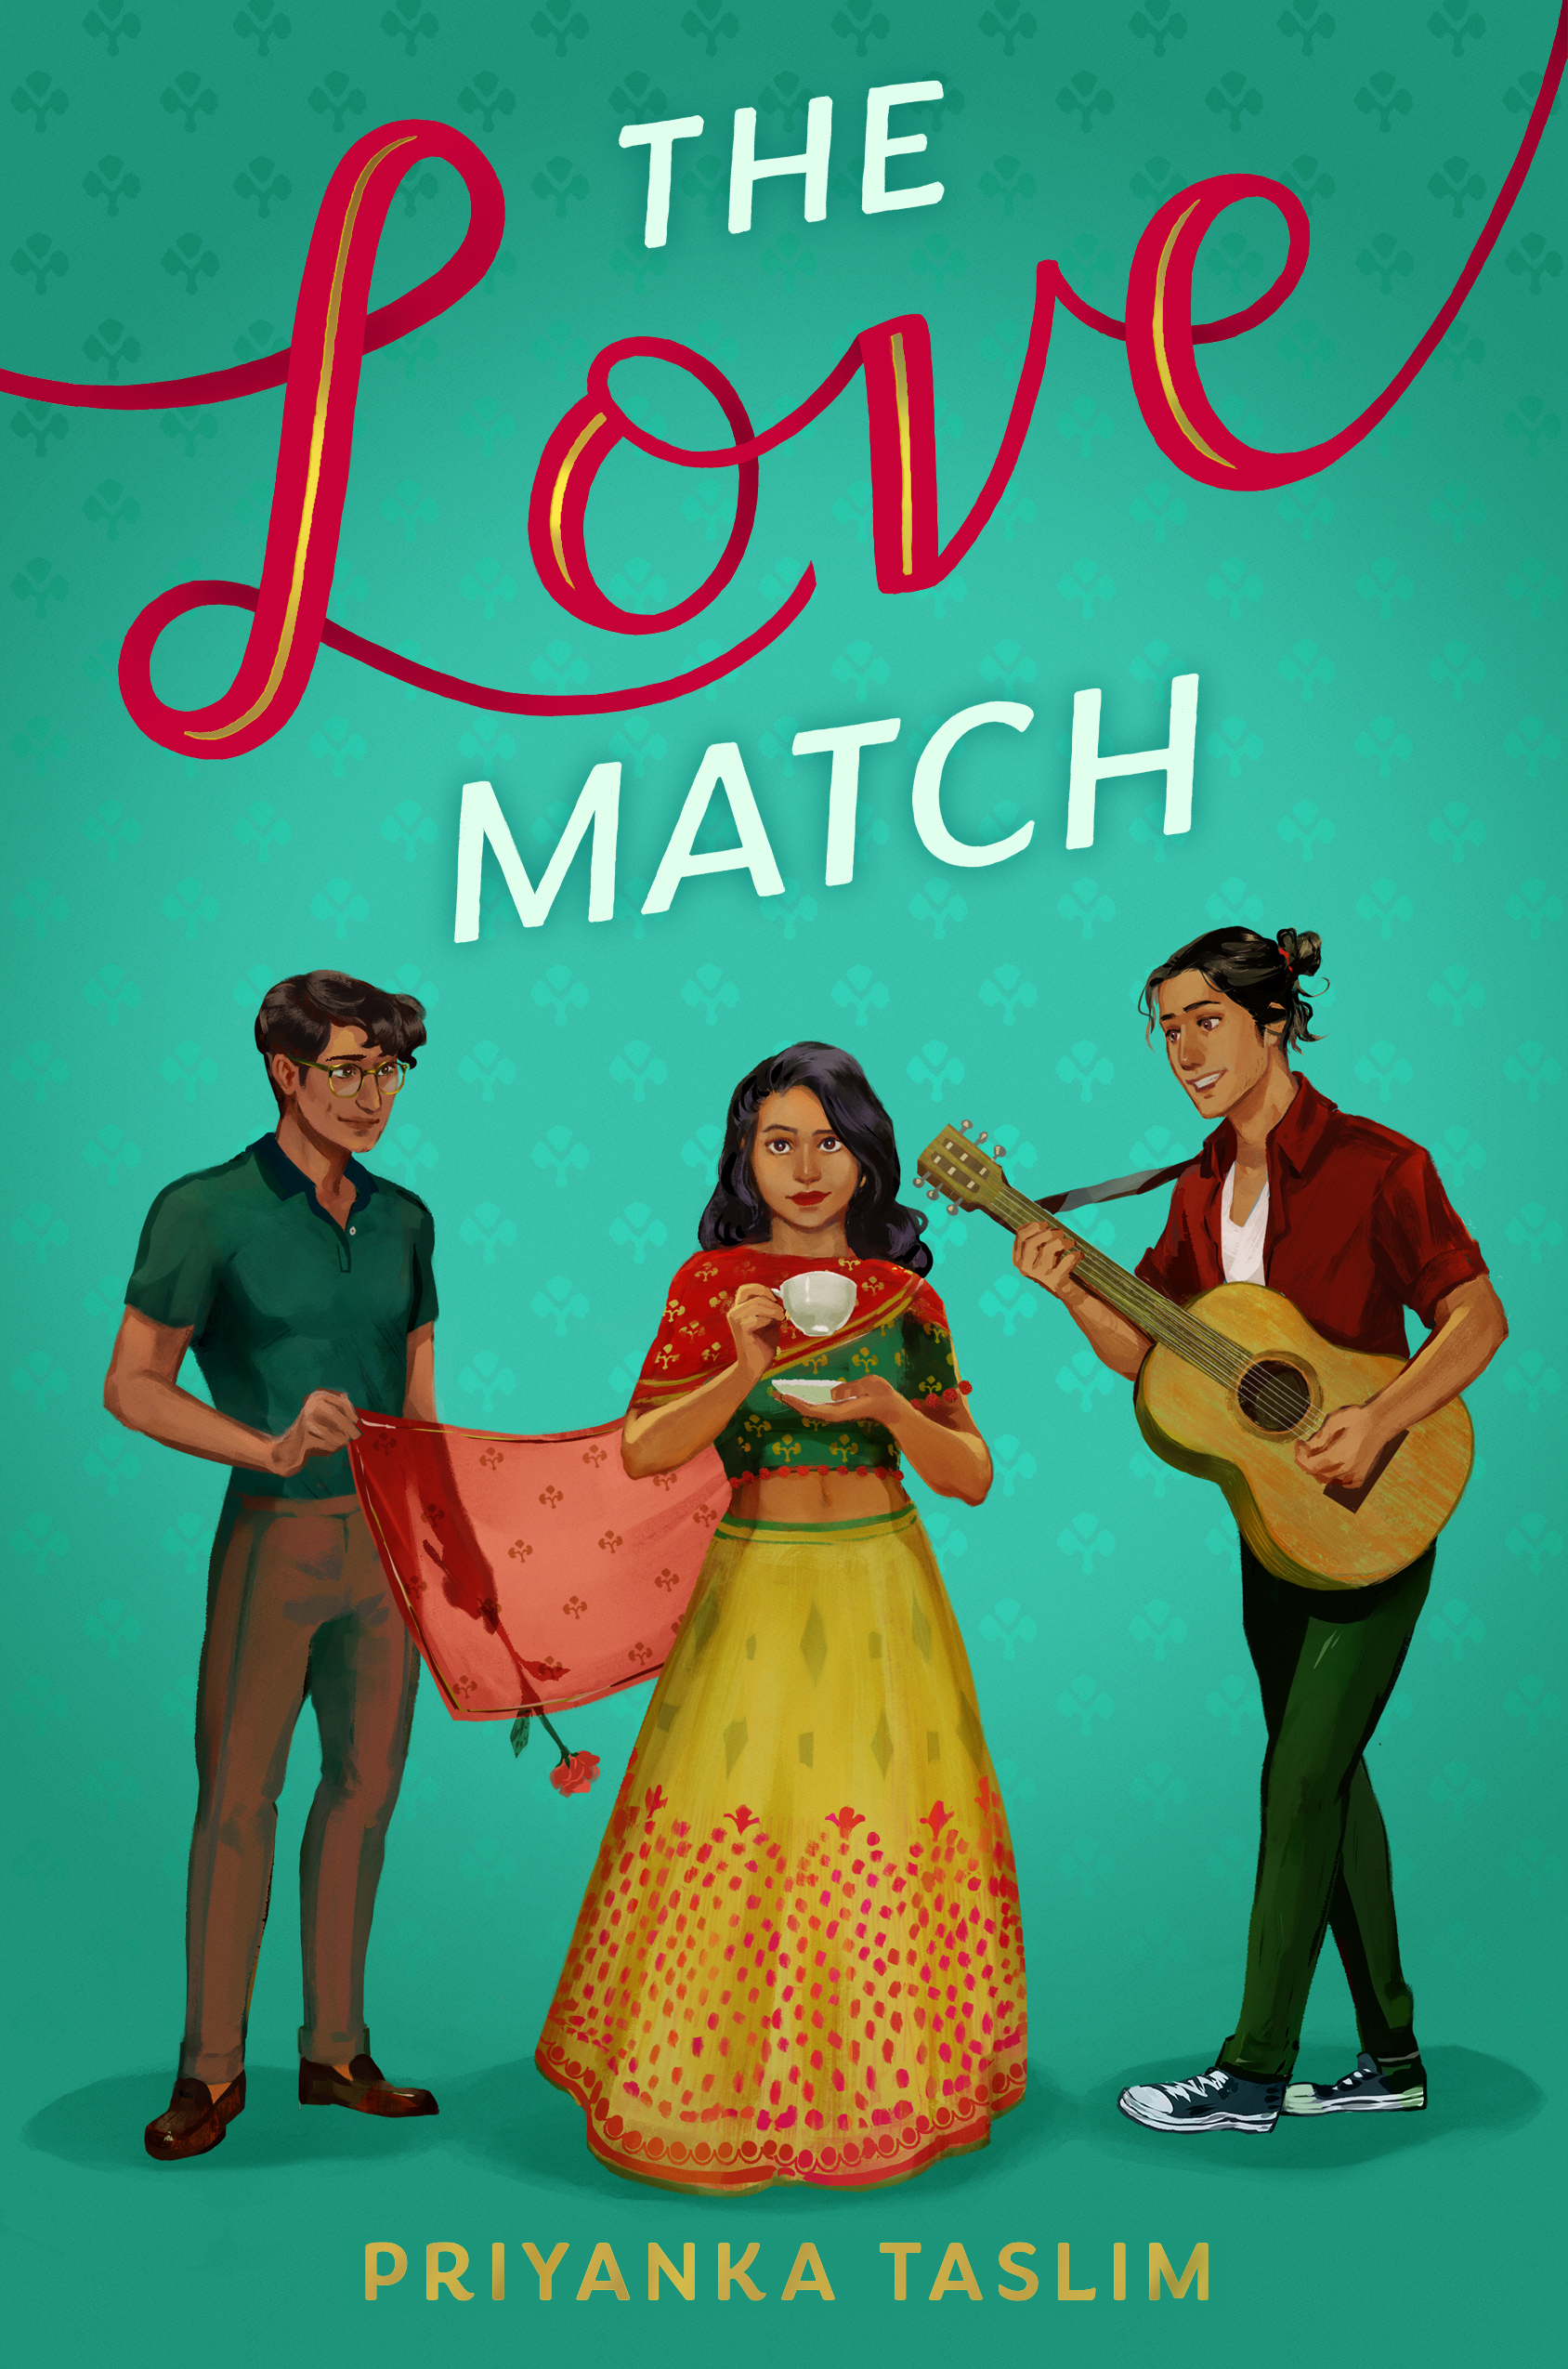 3 Classic Tropes as Reimagined in The Love Match, a guest post by Priyanka Taslim